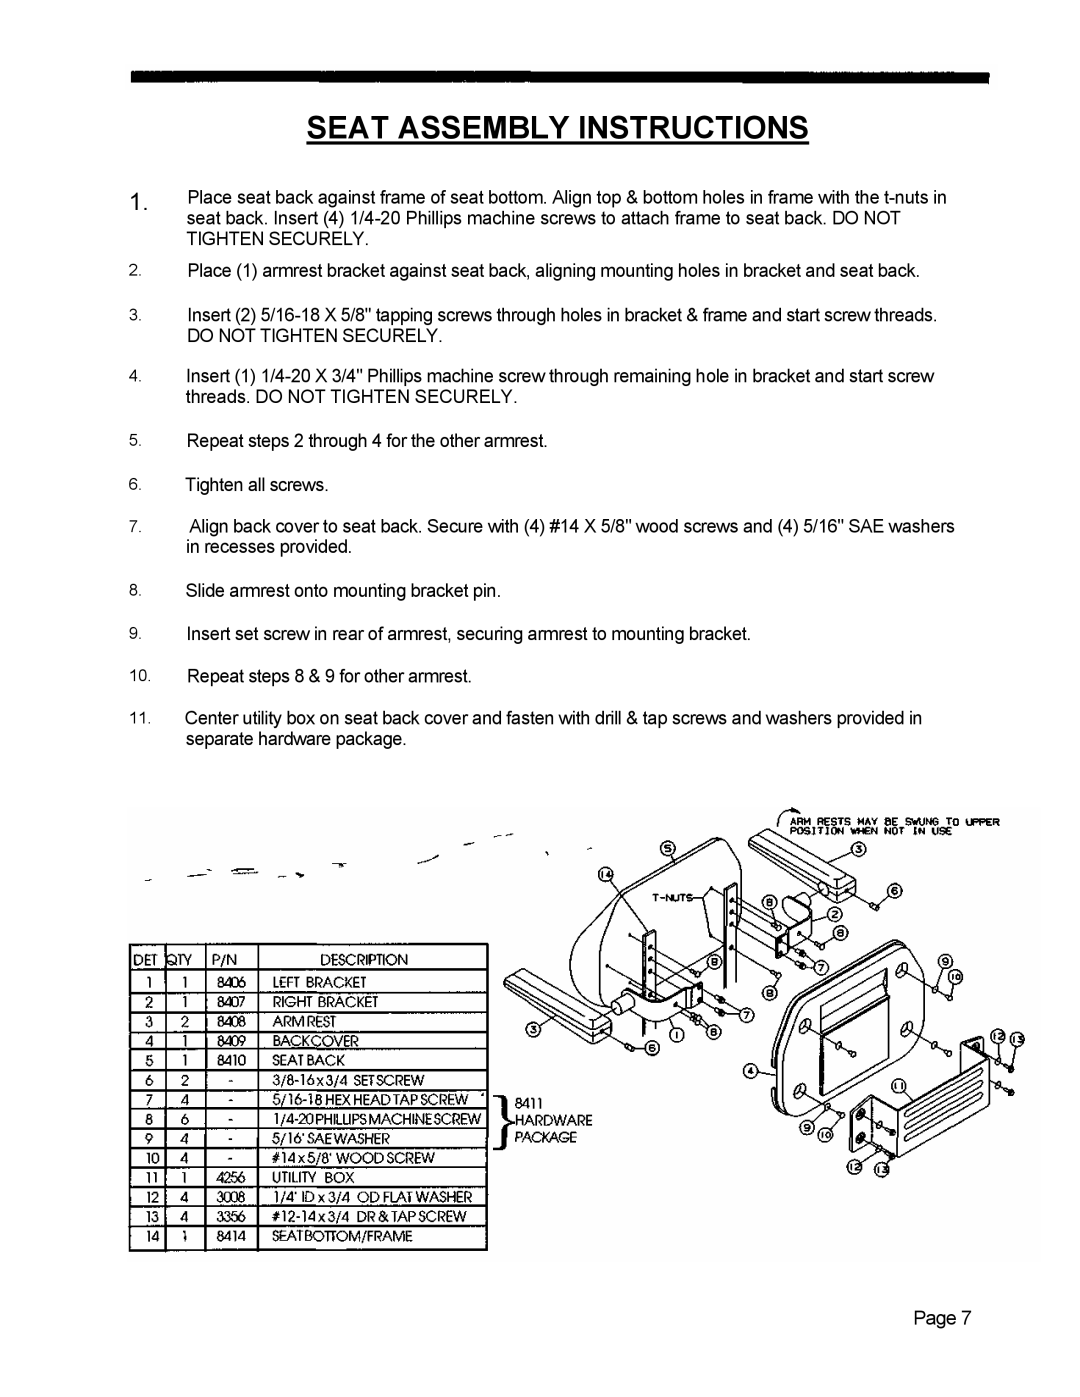 Dixon 5501 manual Seat Assembly Instructions, Page 